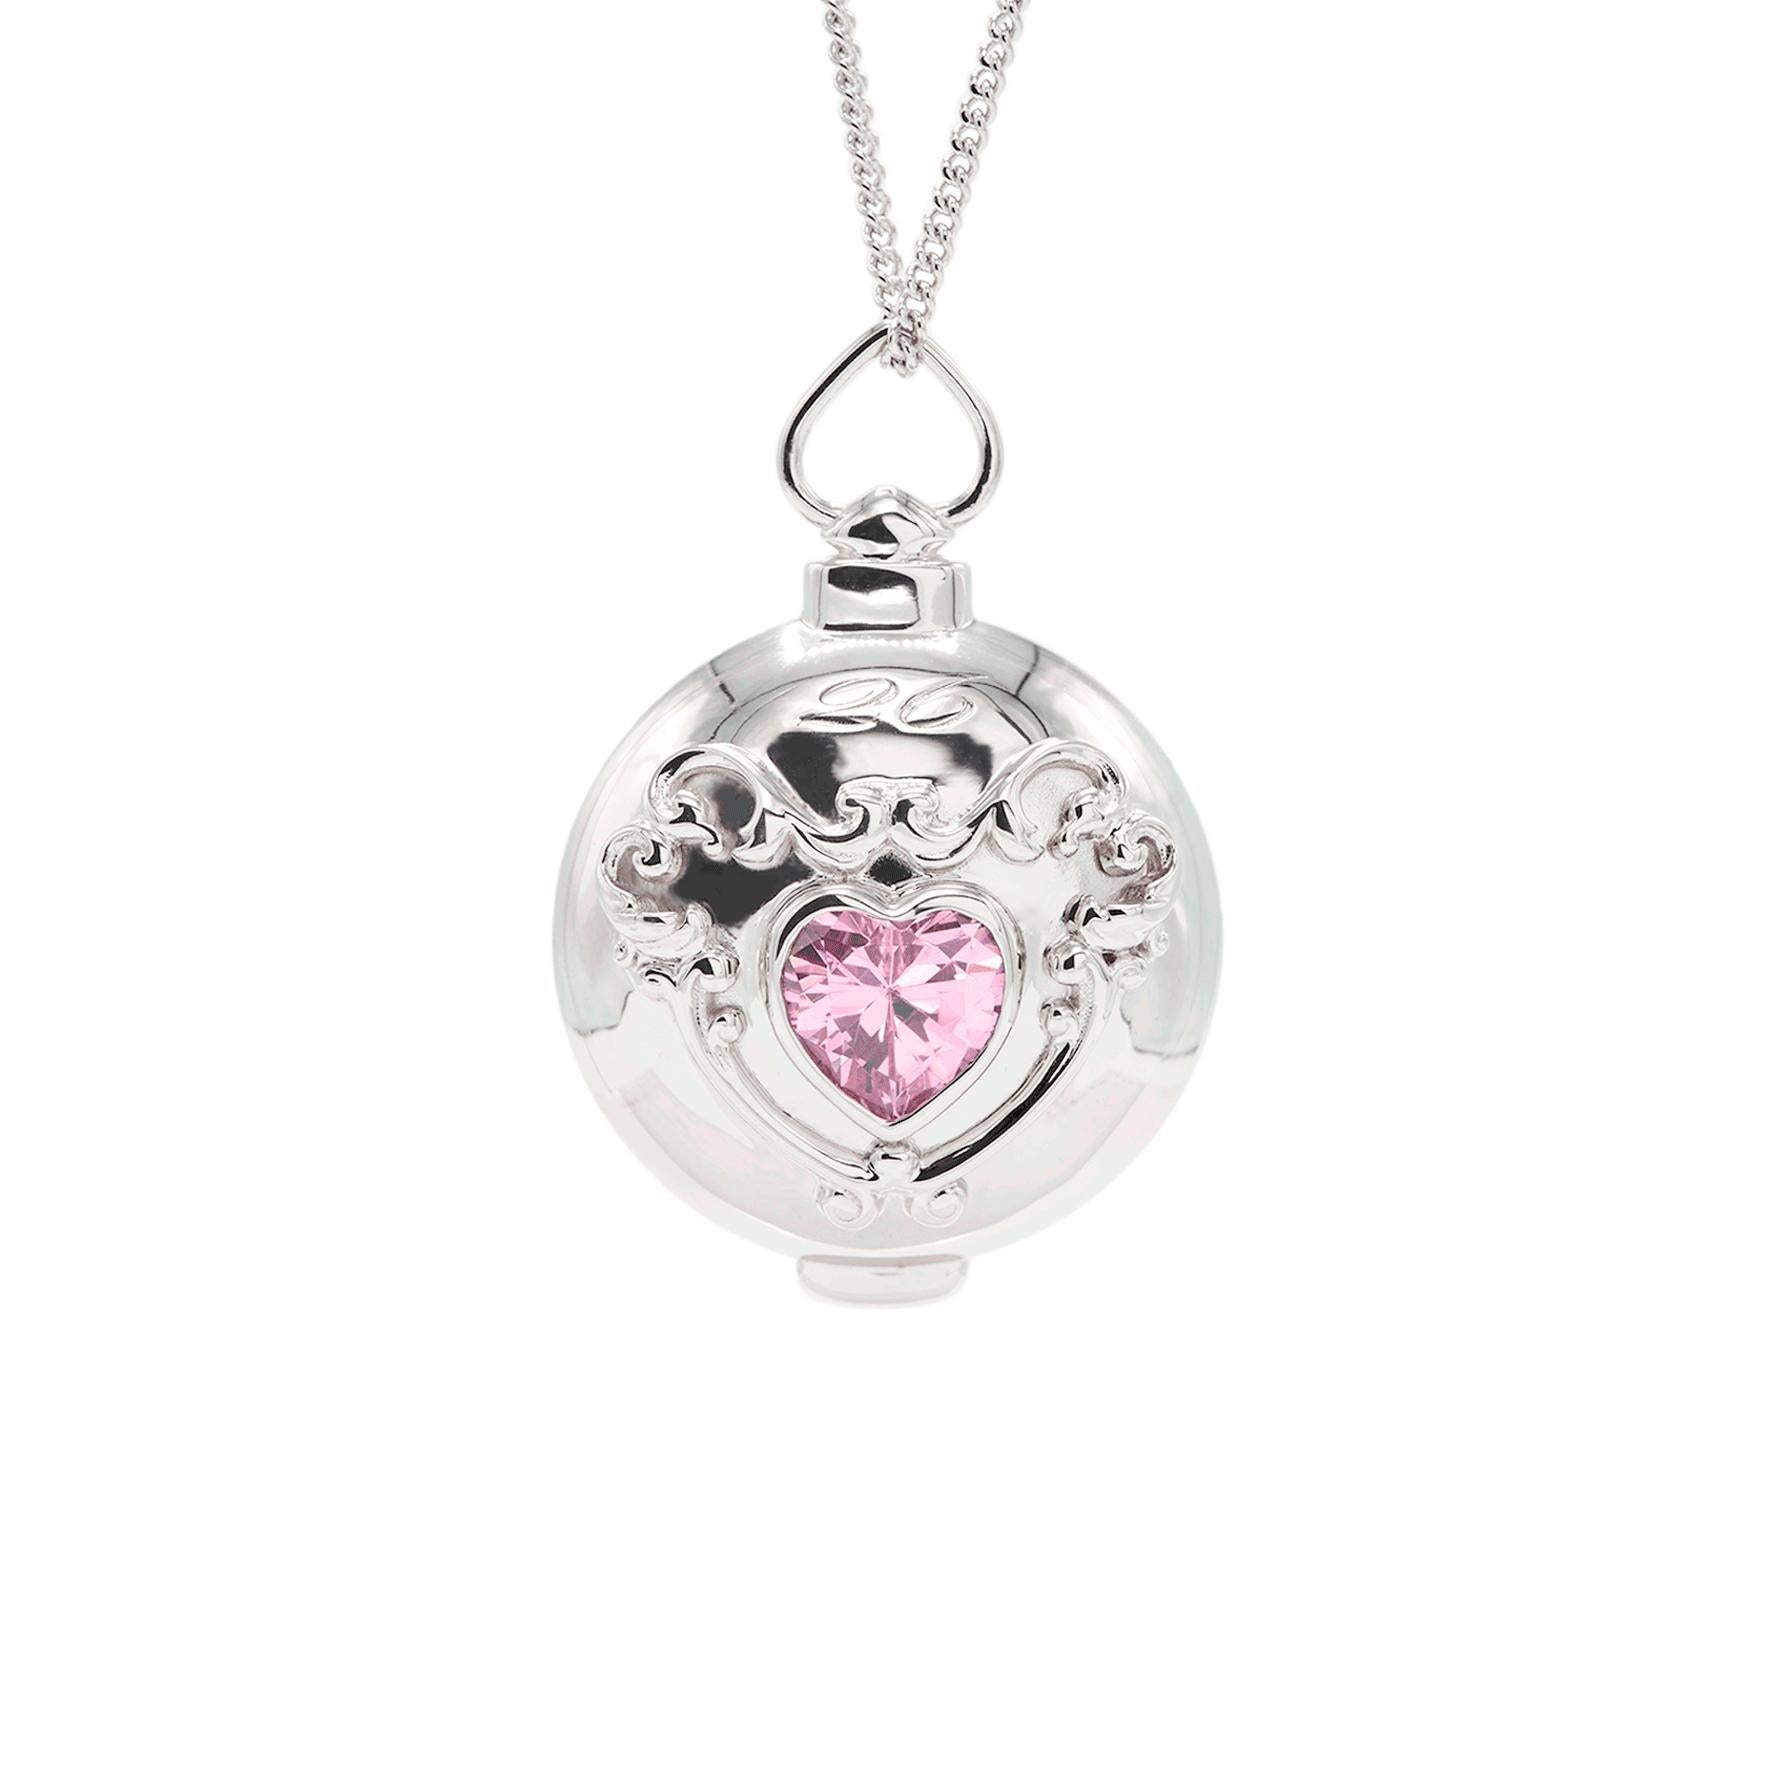 Our special Pleasure collection for everyday wear, set with two pink heart shape zirconias, could store some small stones or any specious little creatures you would like to carry on everyday.

Dimensions:
25mm x 25mm, chain 60cm           